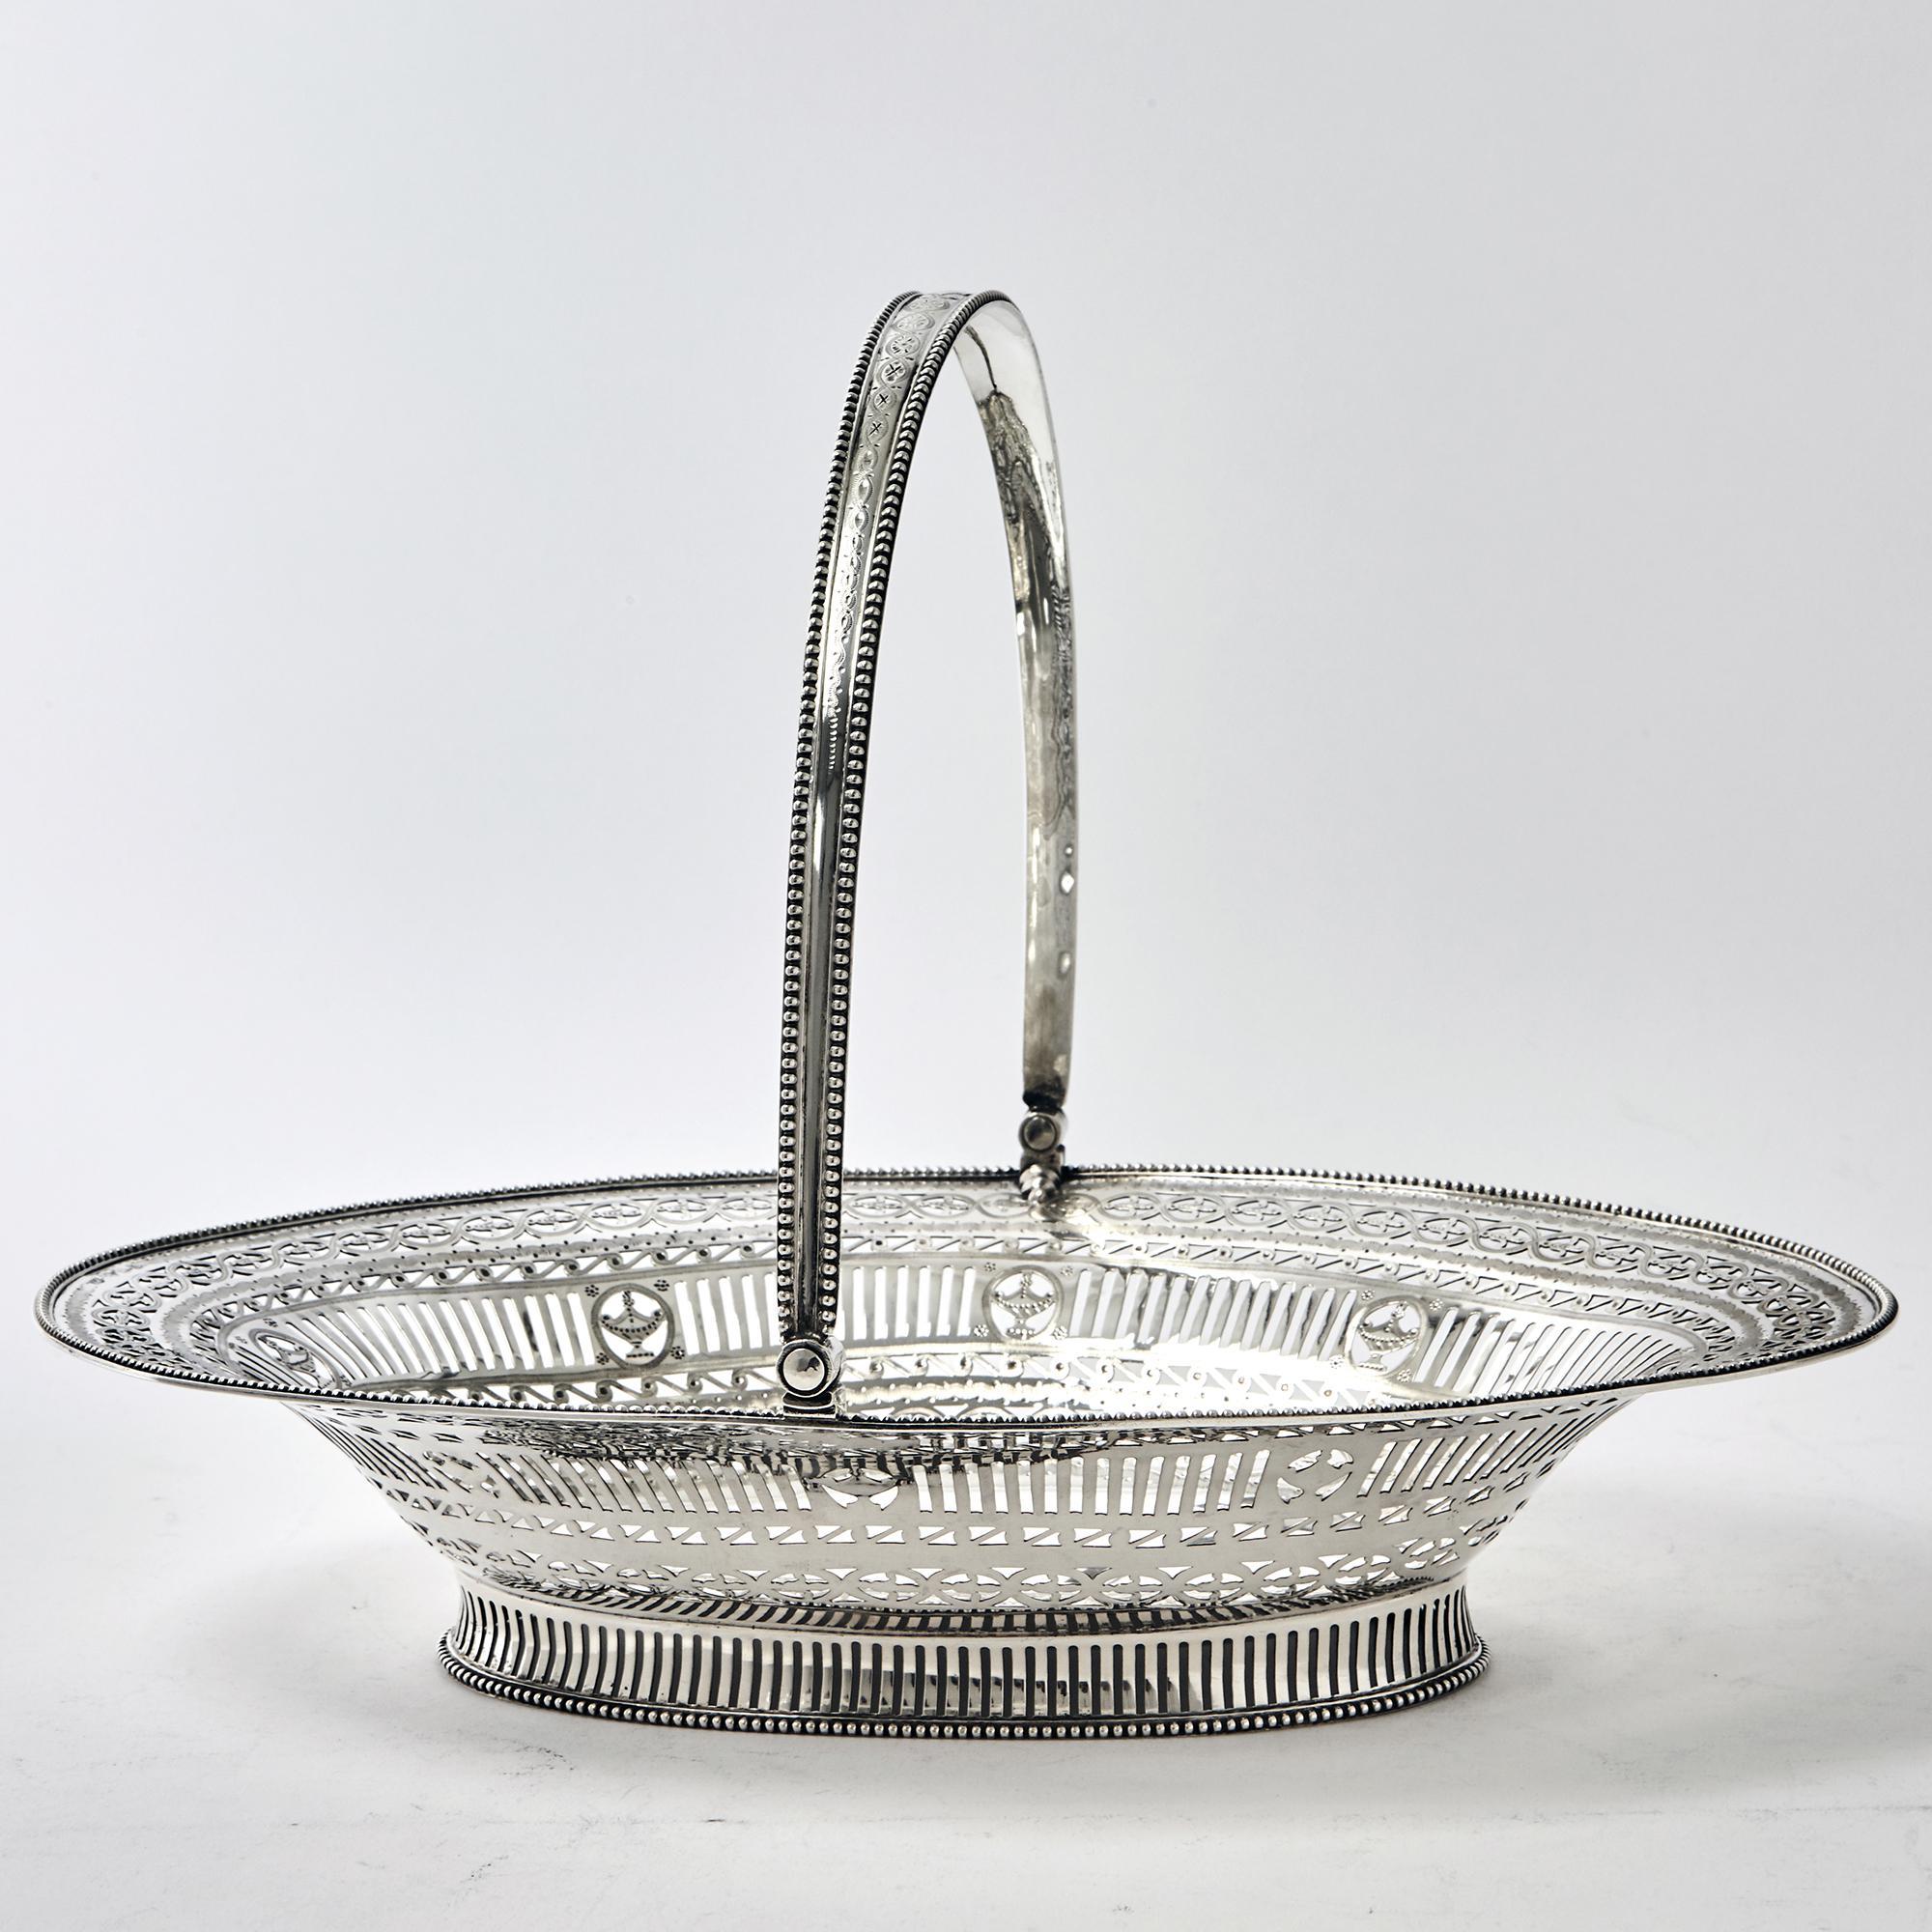 Fine example of Adam-style, neoclassical design incorporated into a finely made silver basket by premier female silversmith, Hester Bateman. The basket is hand-pierced and engraved and the border and handle have applied 'bead' pattern mounts. This